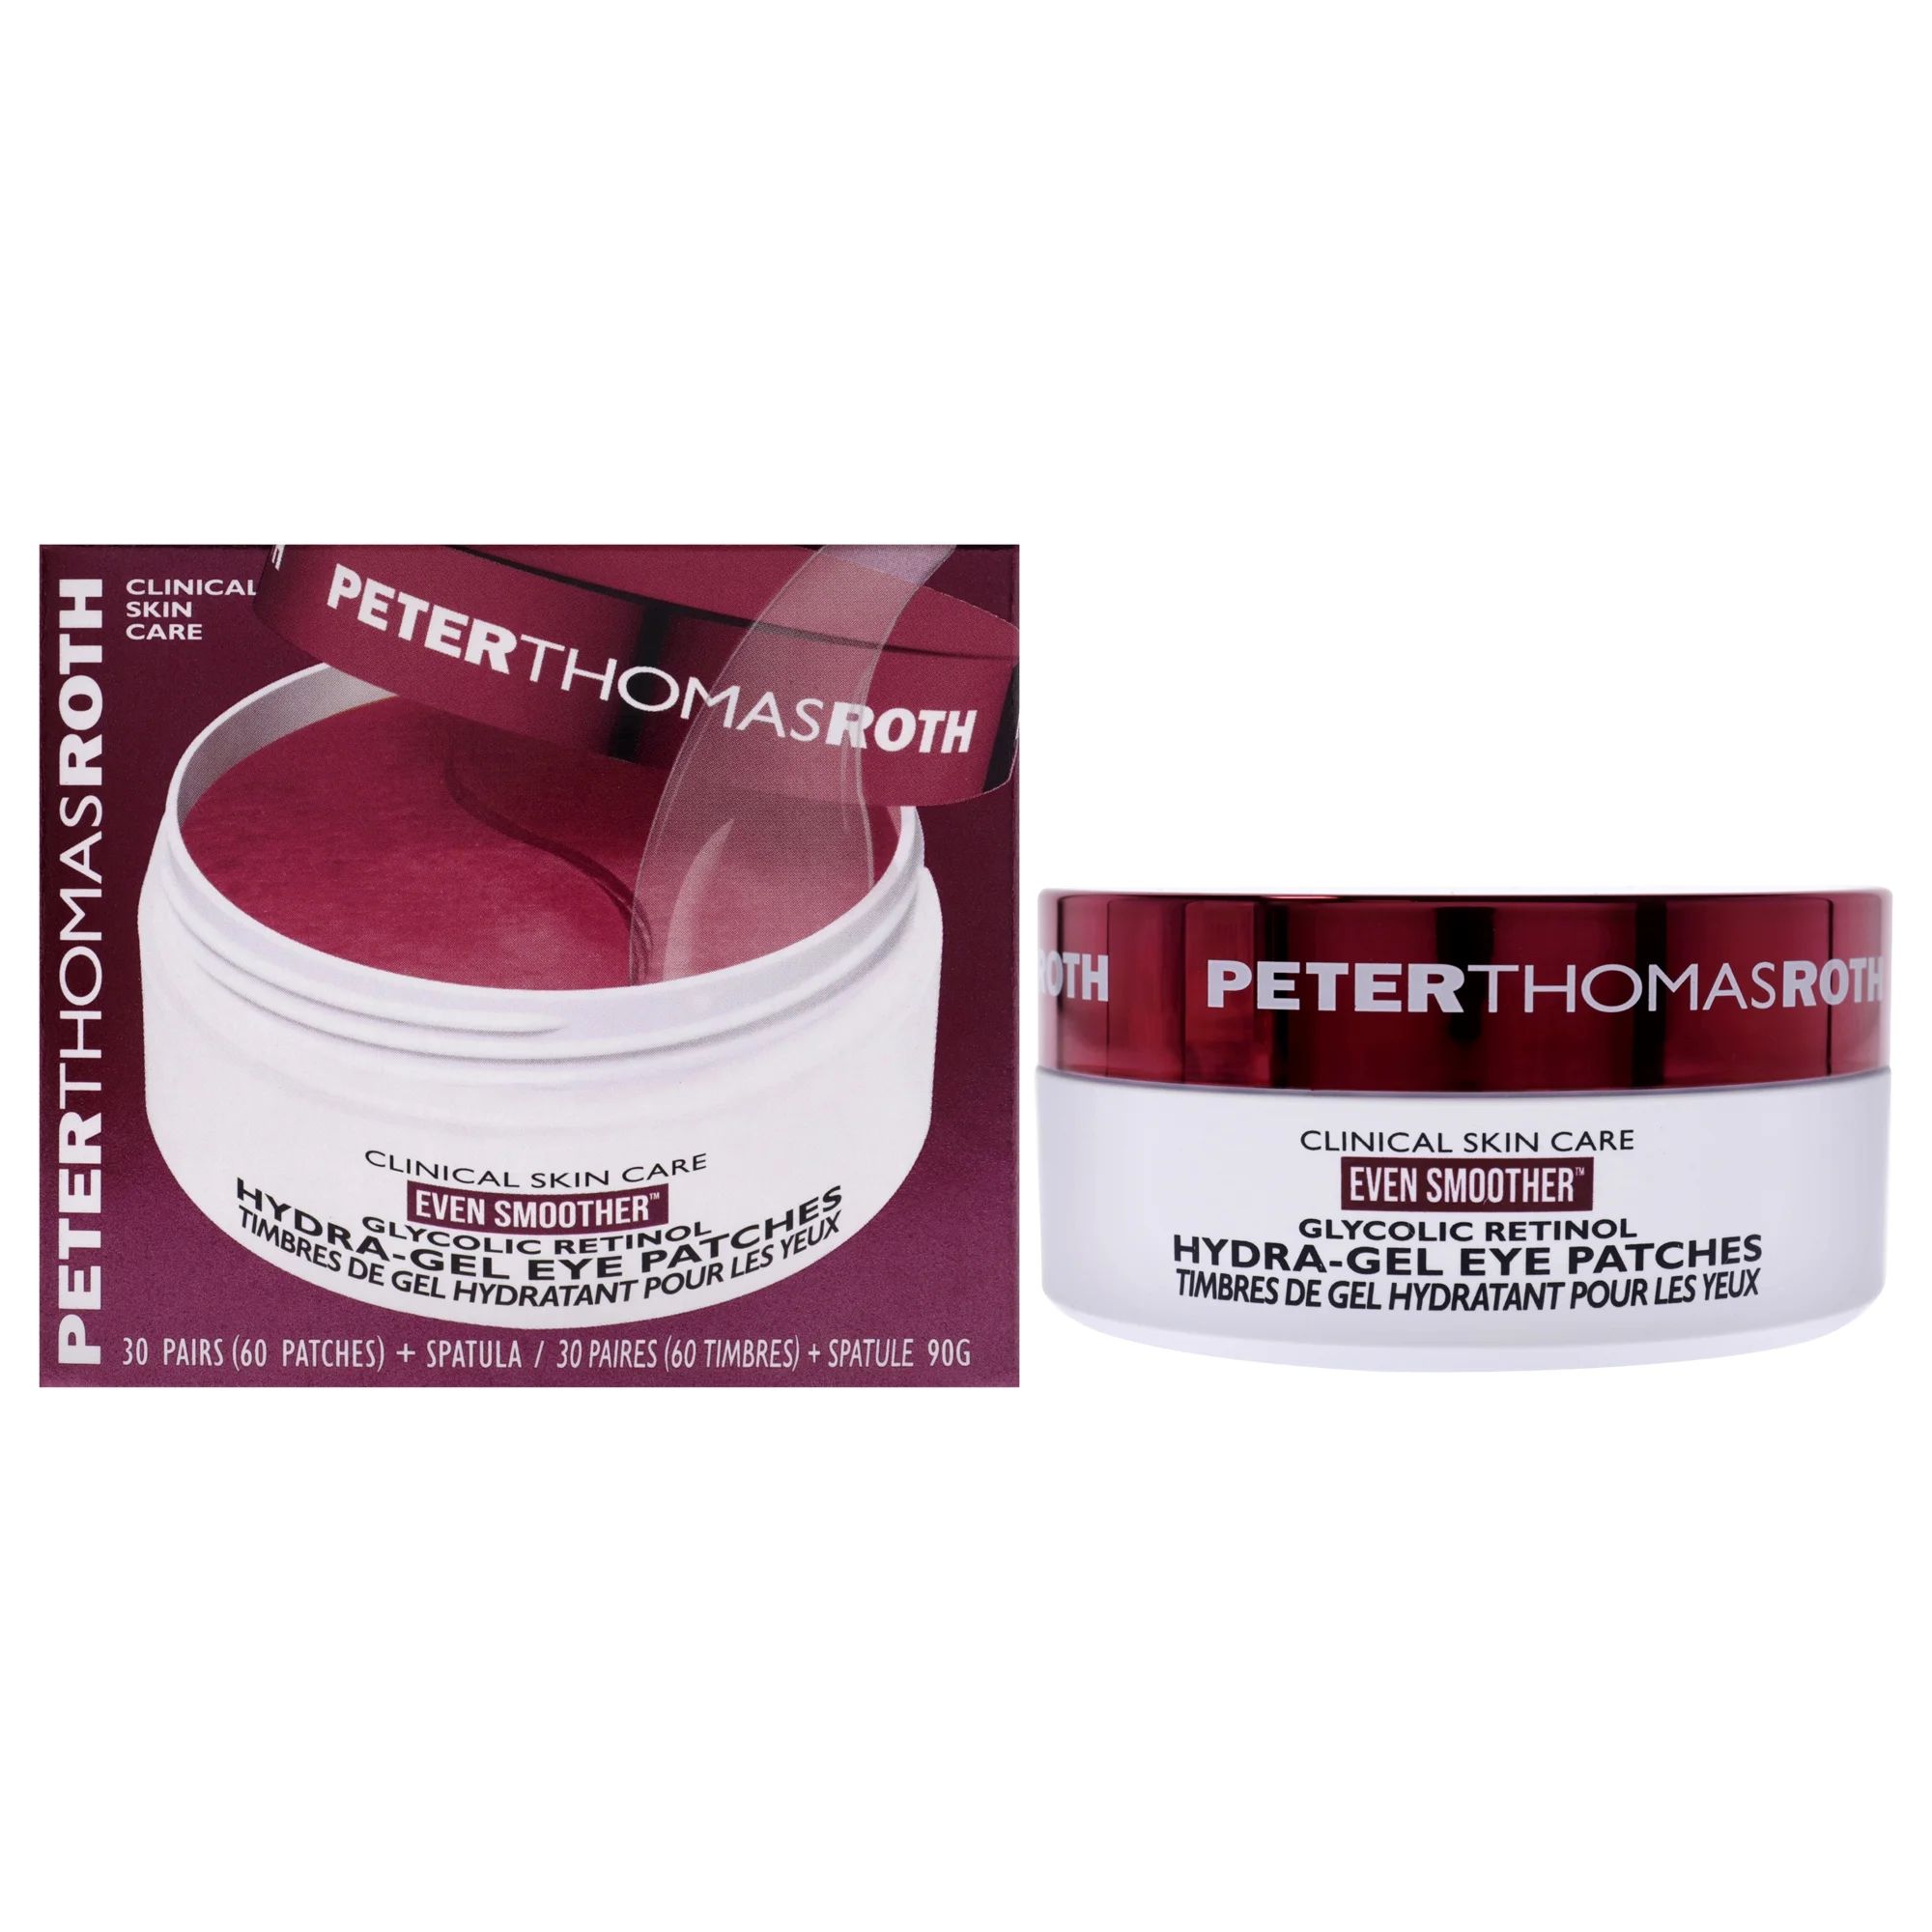 Peter Thomas Roth Even Smoother Glycolic Retinol Hydra-Gel Eye Patches, 30 count | Walmart (US)